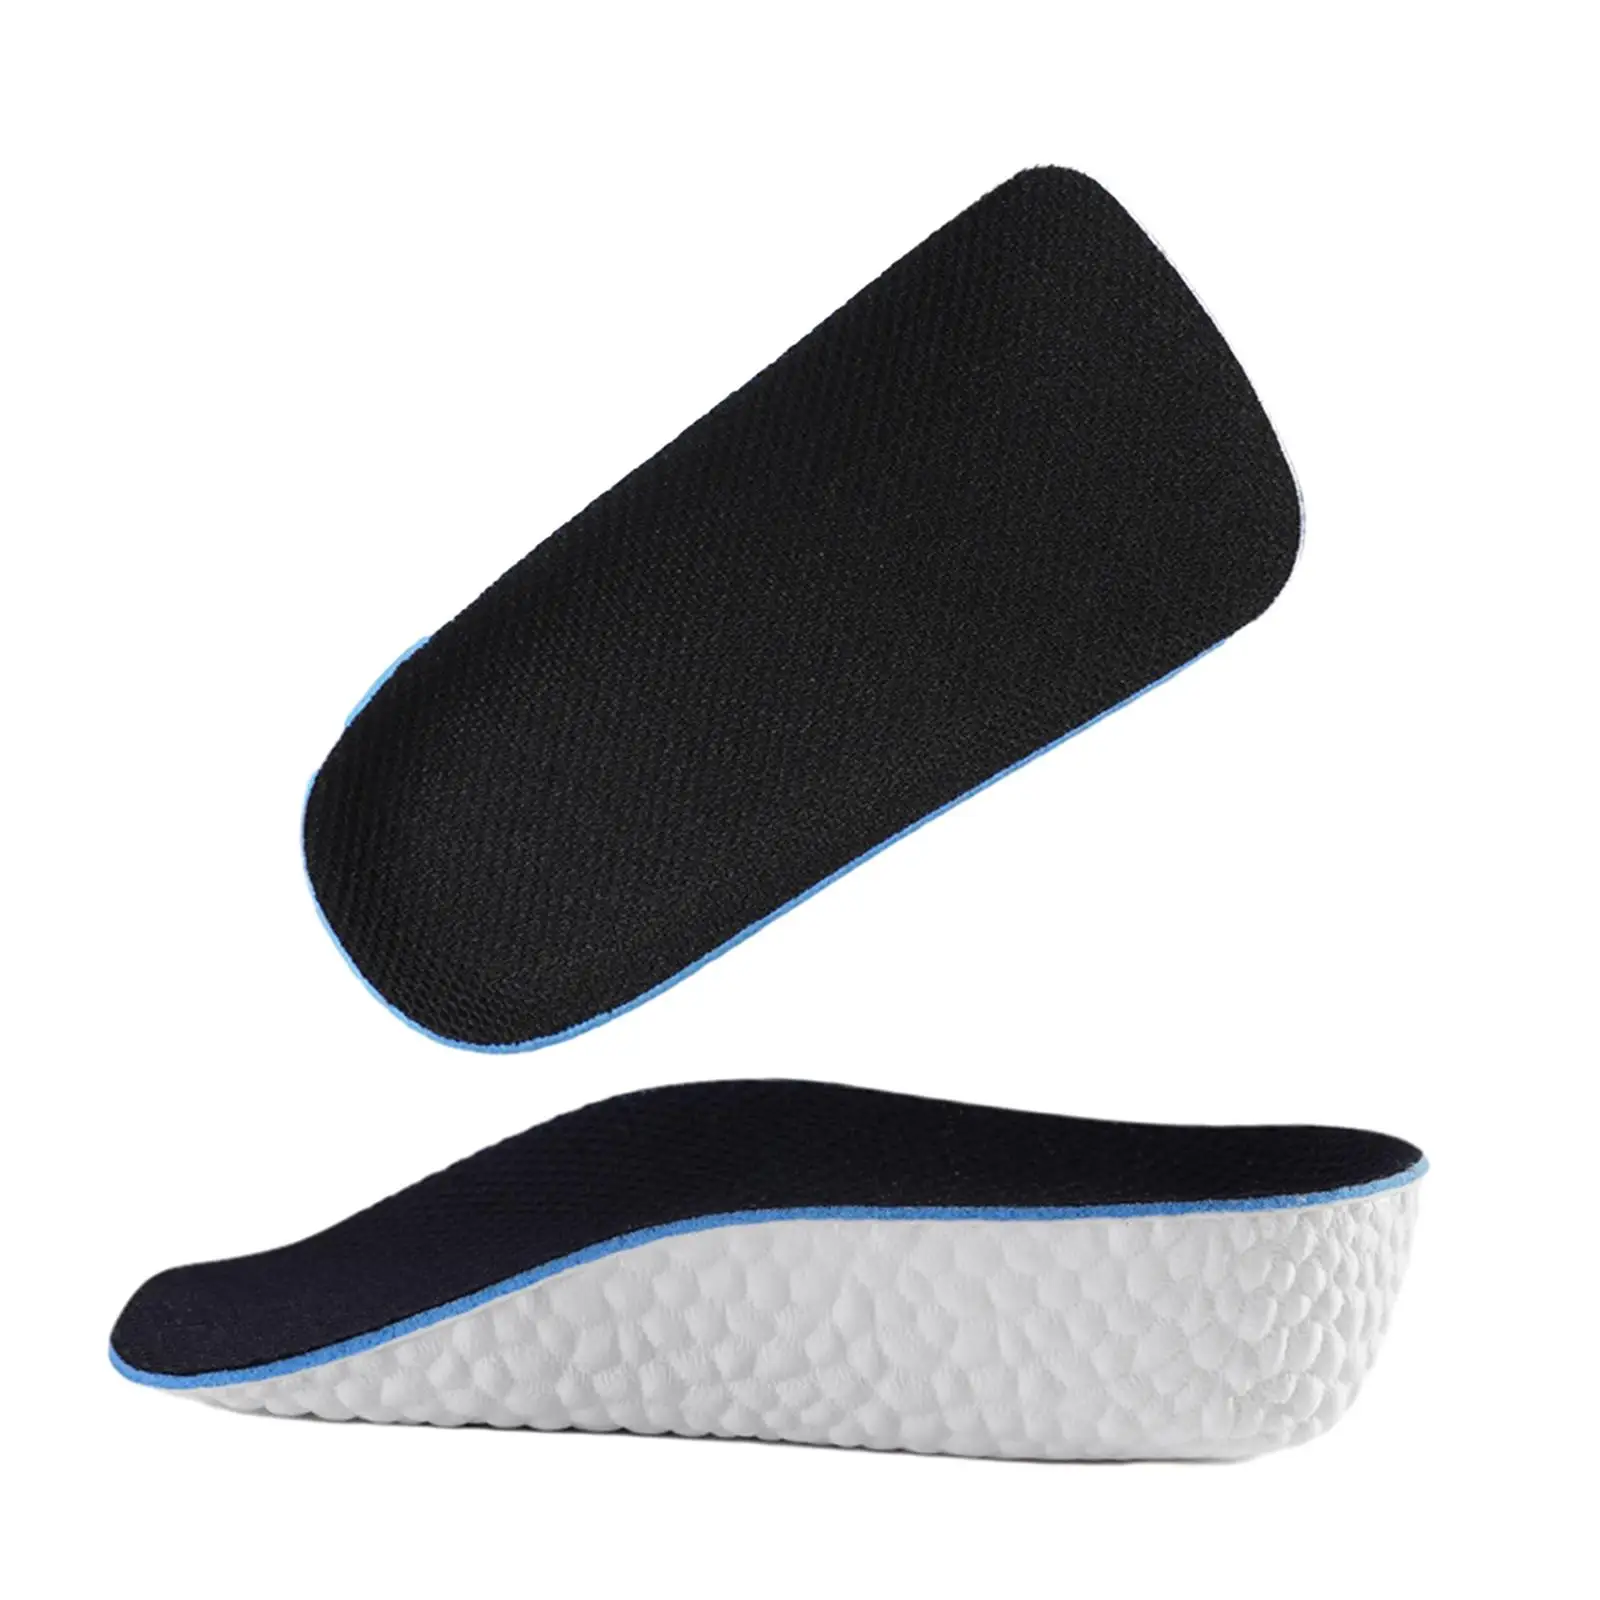 2x Height Increase Insoles Arch Support Insert Cushion Absorb Sweat Invisible Non Slip EVA for Men and Women for Hiking Boots